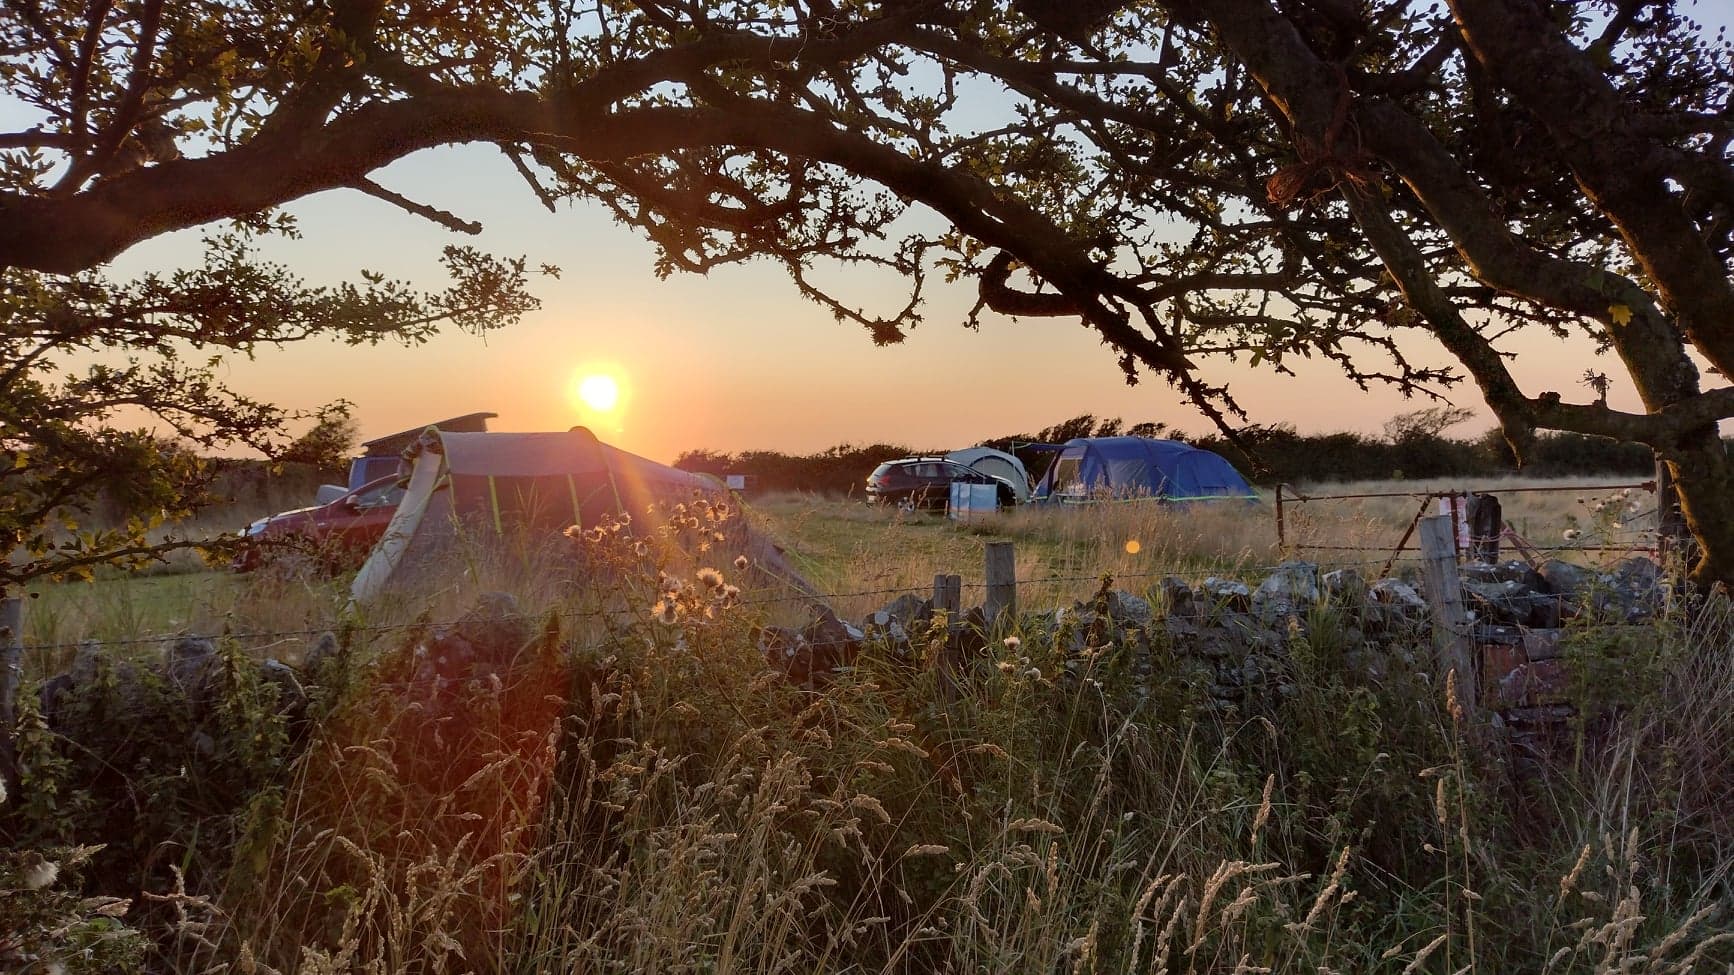 Amazing sunsets here at Plas Llanfair Meadow Camping